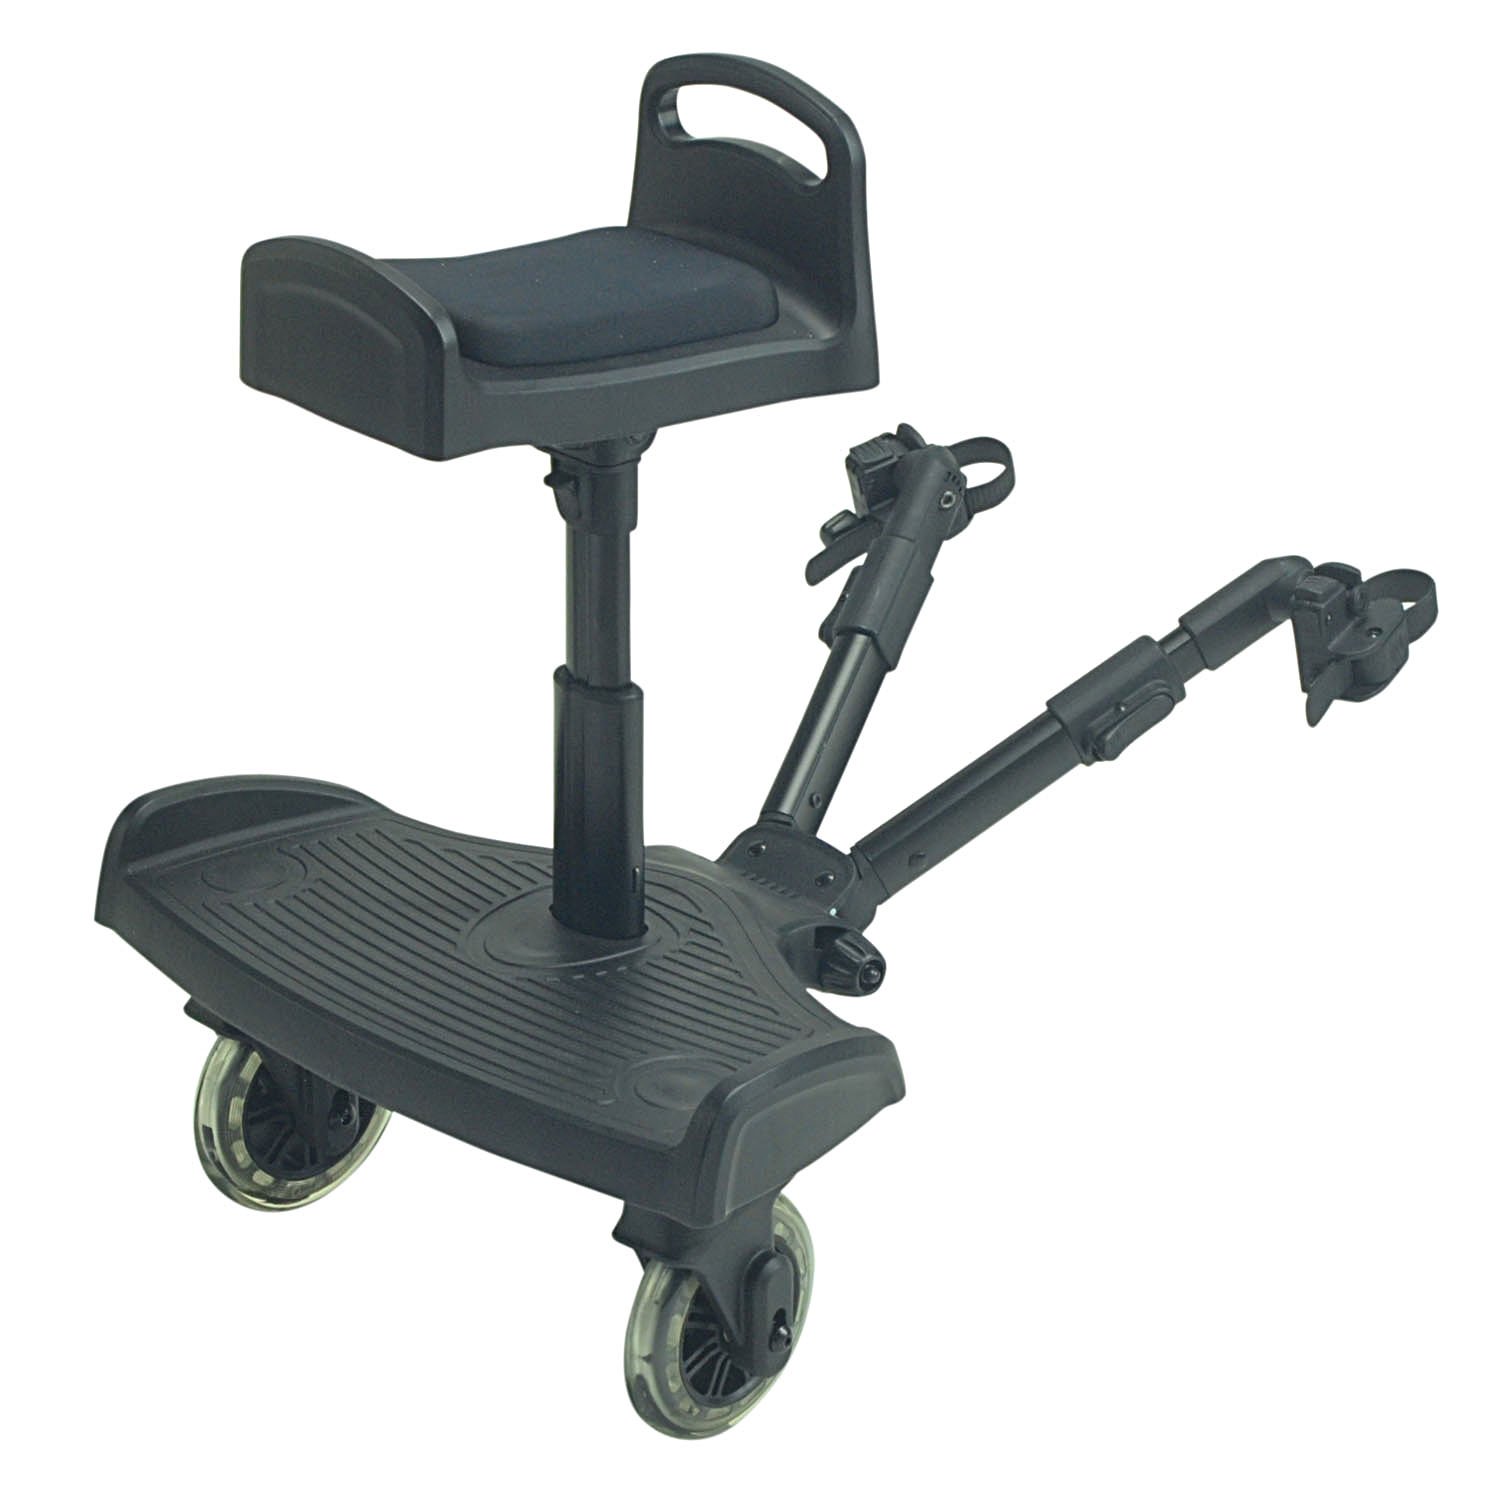 For-Your-Little-Ride On Board Compatible Travel Systems, Mutsy Slider